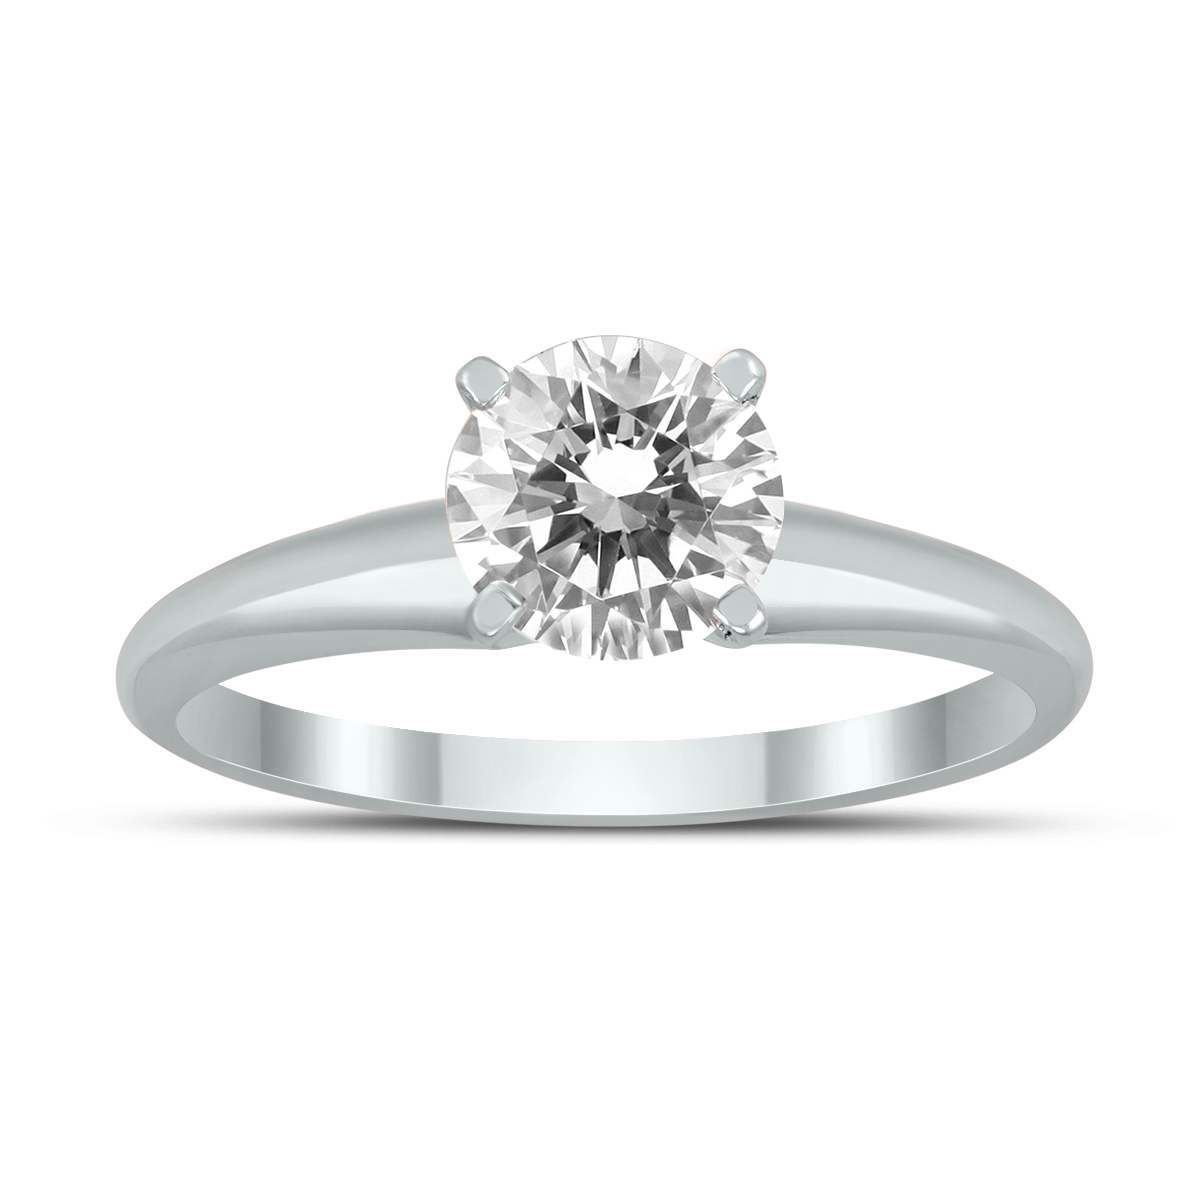 Image of AGS Certified 1 Carat Diamond Solitaire Ring in 14K White Gold (J-K Color I2-I3 Clarity)